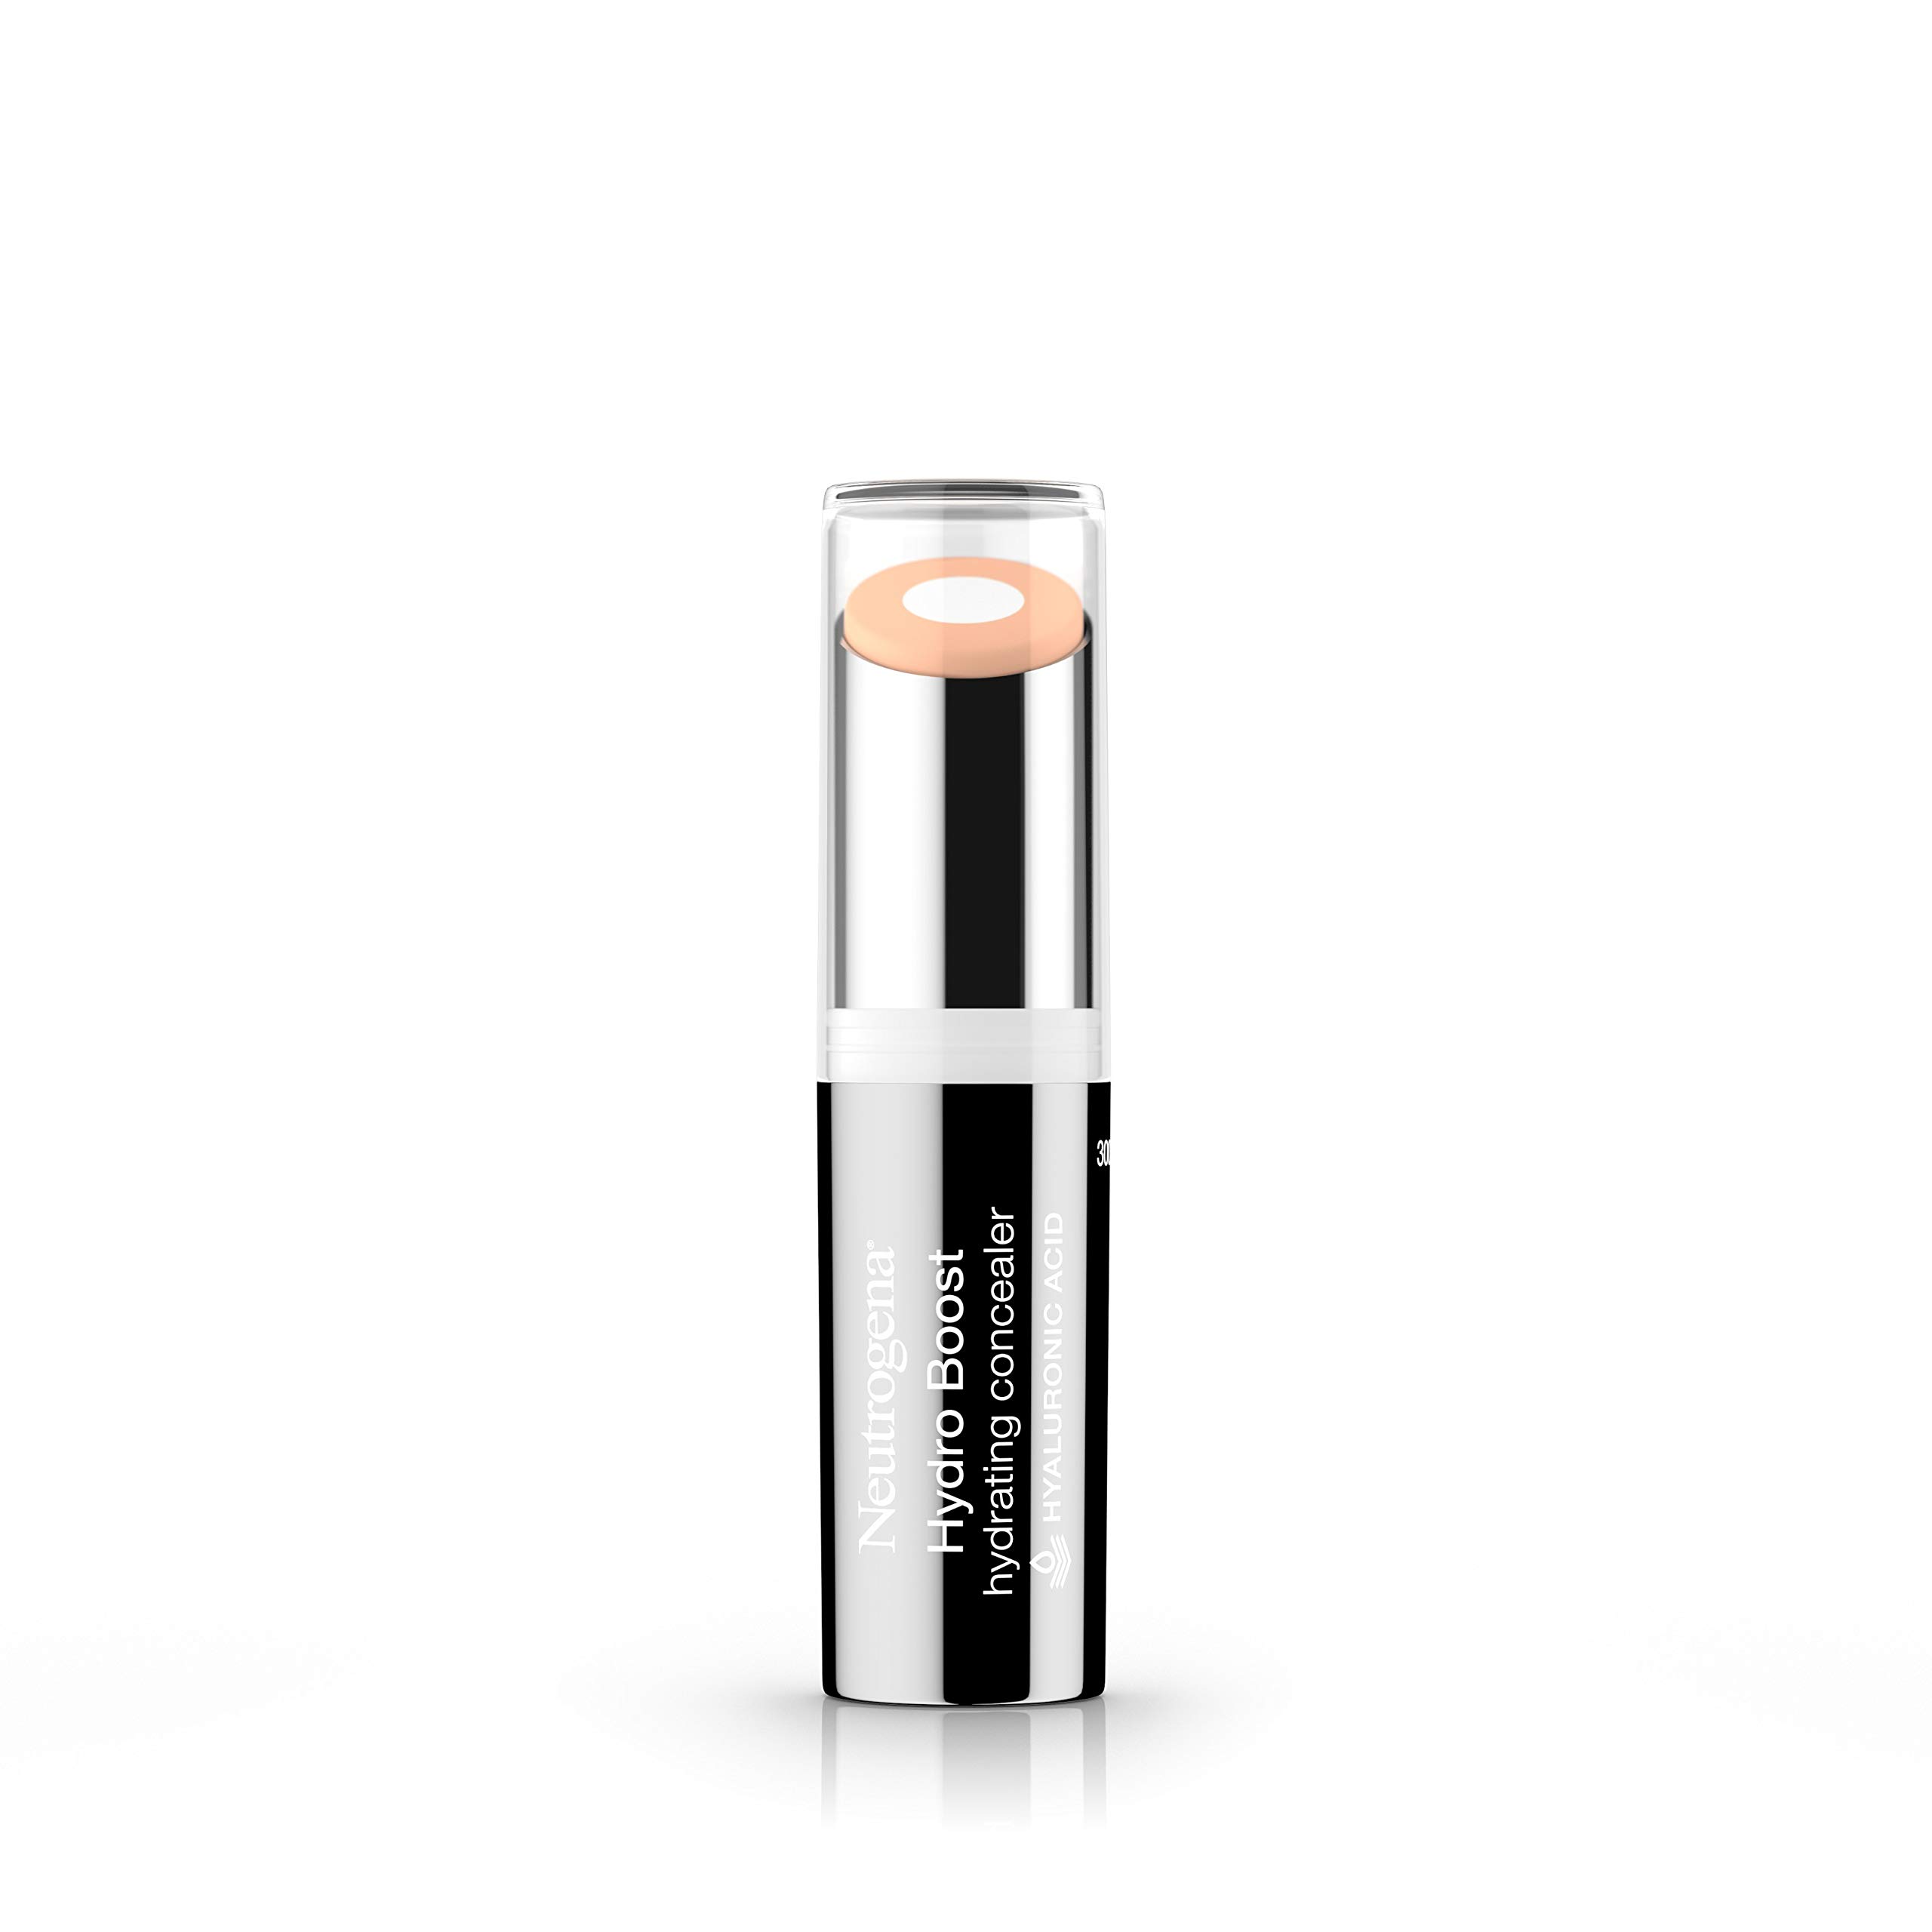 Neutrogena Hydro Boost Hydrating Concealer Stick for Dry Skin, Oil-Free, Lightweight, Non-Greasy and Non-Comedogenic Cover-Up Makeup with Hyaluronic Acid, 10/Fair, 0.12 Oz